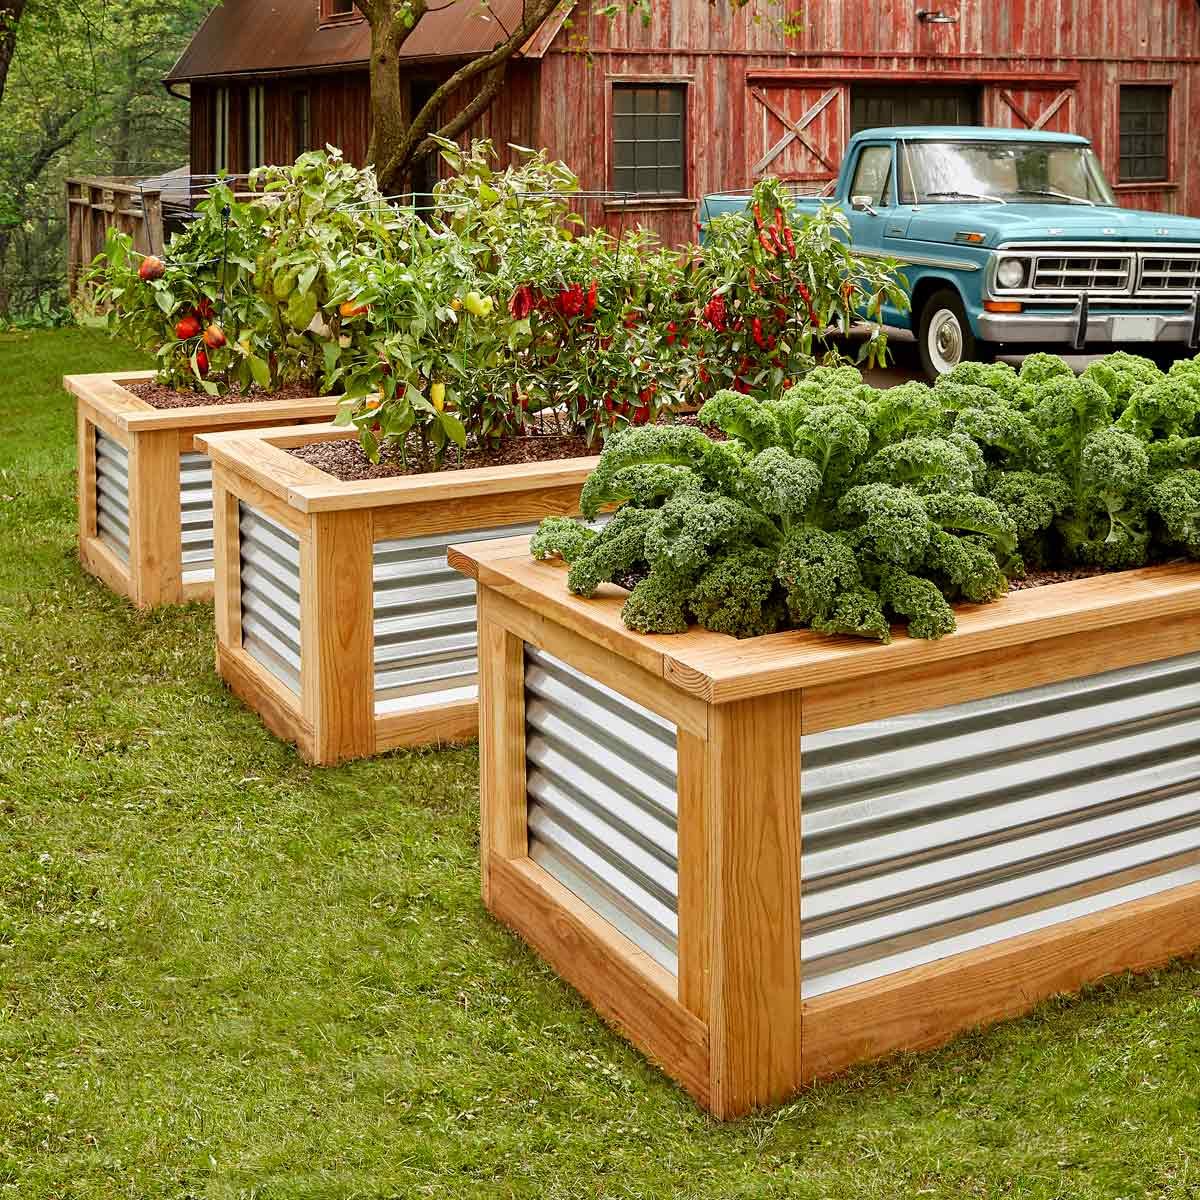 What is the least expensive way to build a raised garden bed?